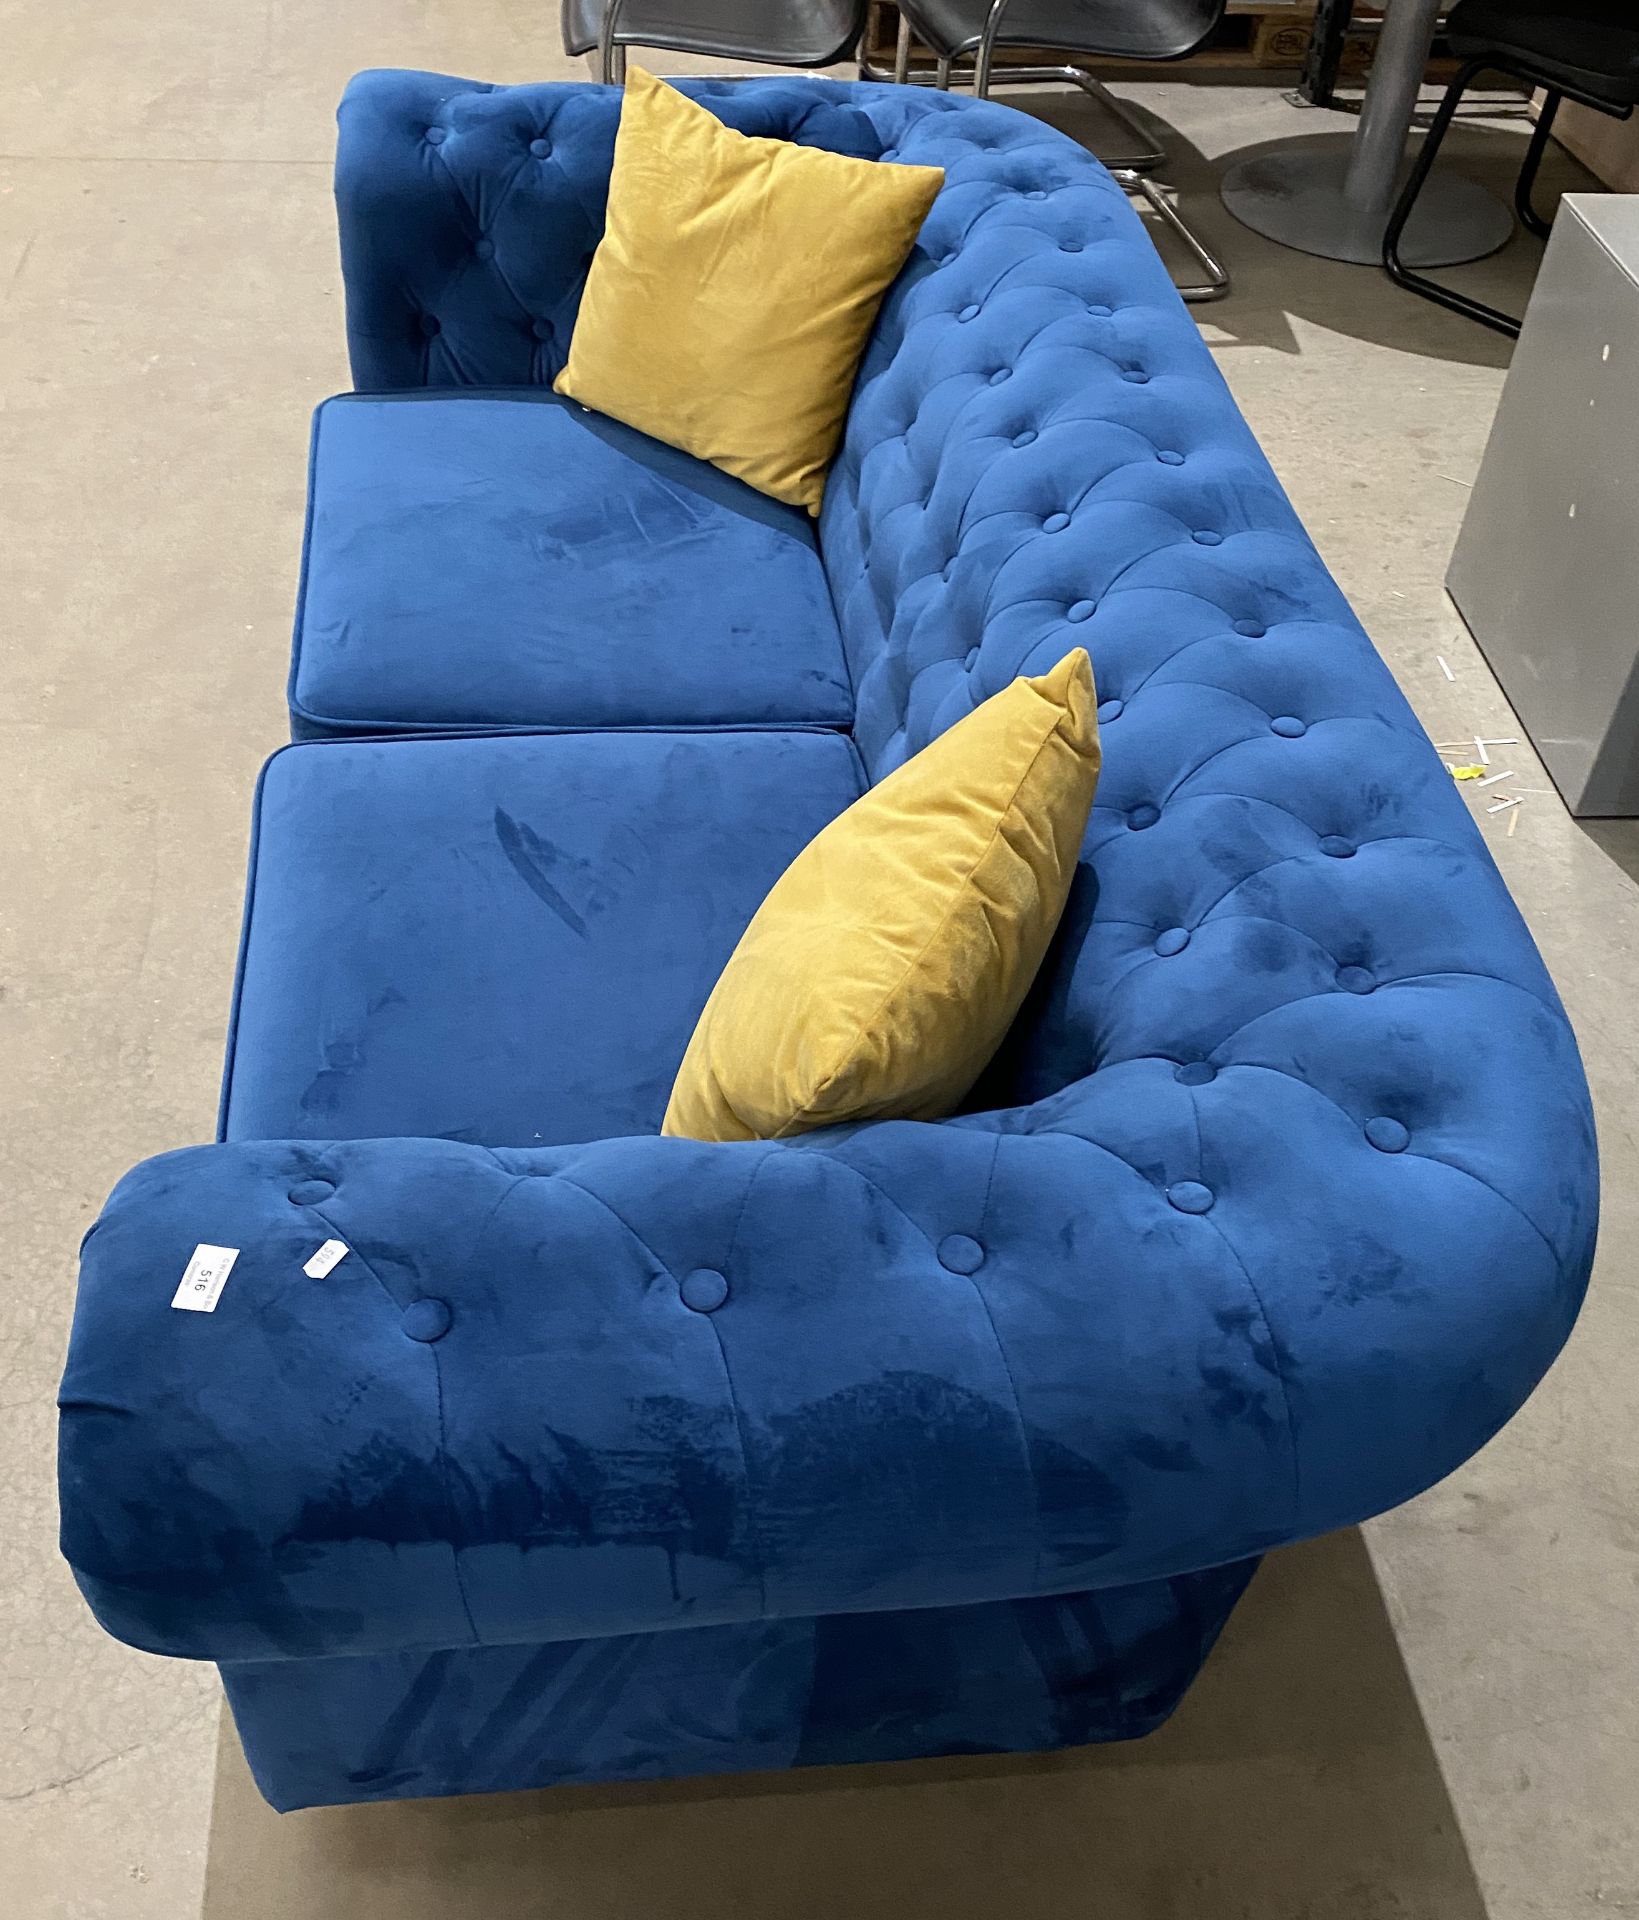 Blue upholstered button-backed Chesterfield style 2-seater sofa complete with cushions (saleroom - Image 6 of 11